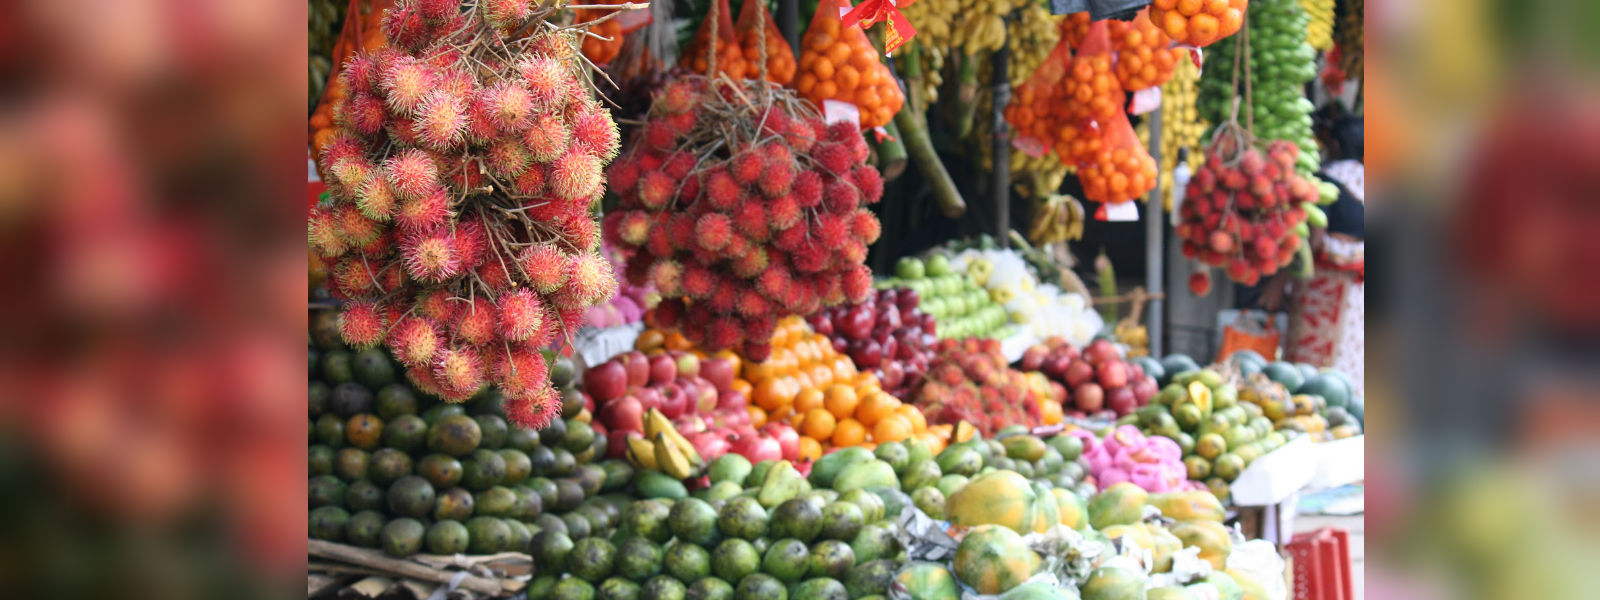 Imported vegetable and fruit to be taxed